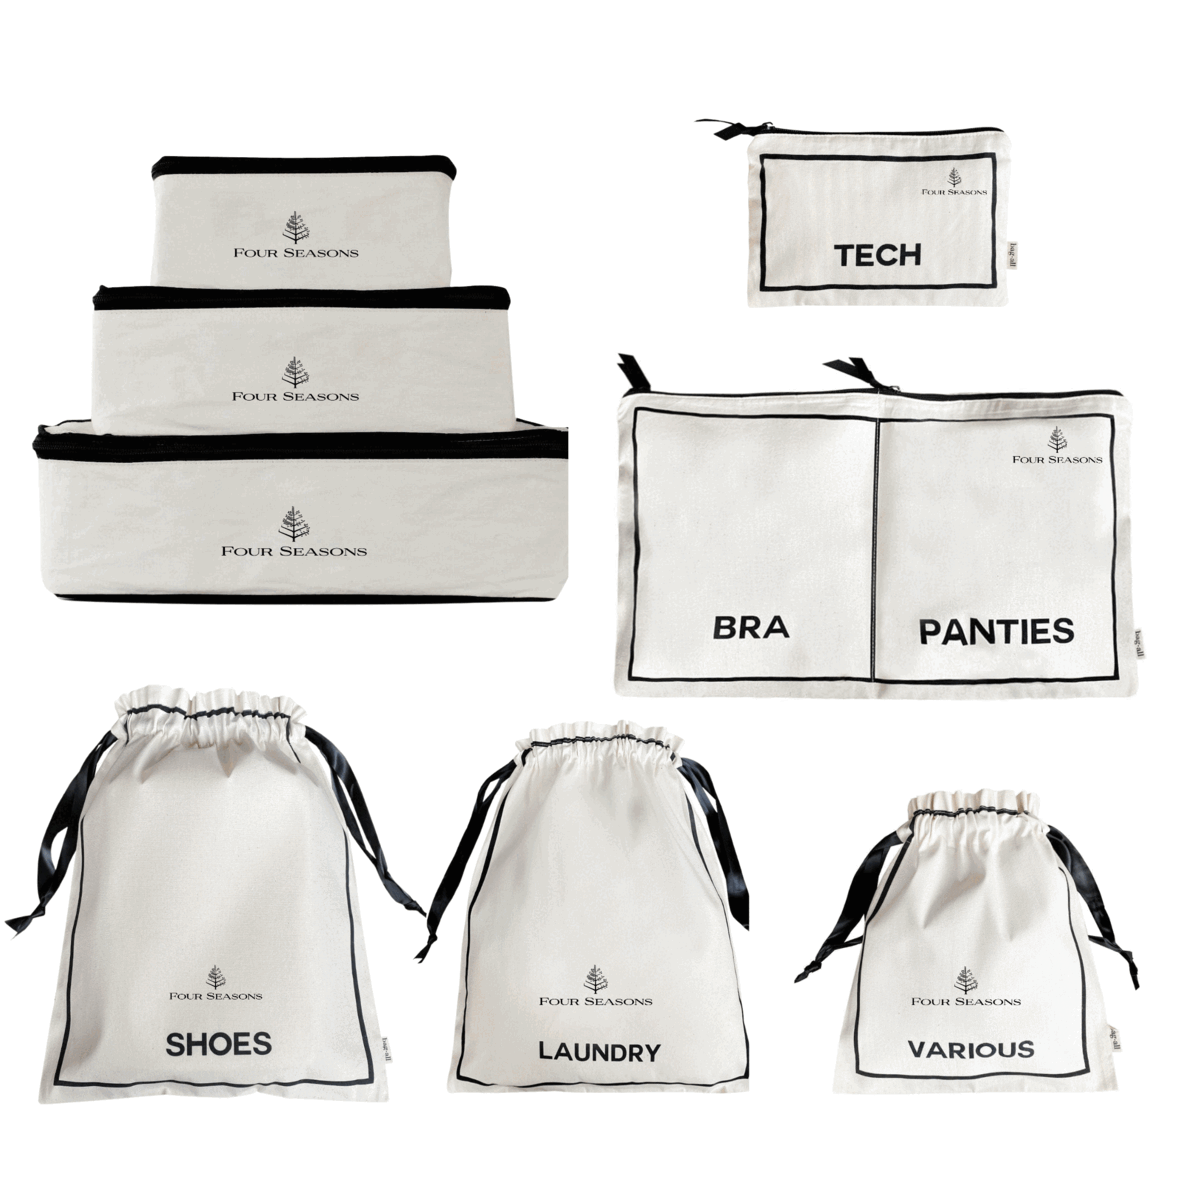 
                  
                    CUSTOM BA Packing Organizers and Travel Set in High Quality Cotton, 8-pack
                  
                